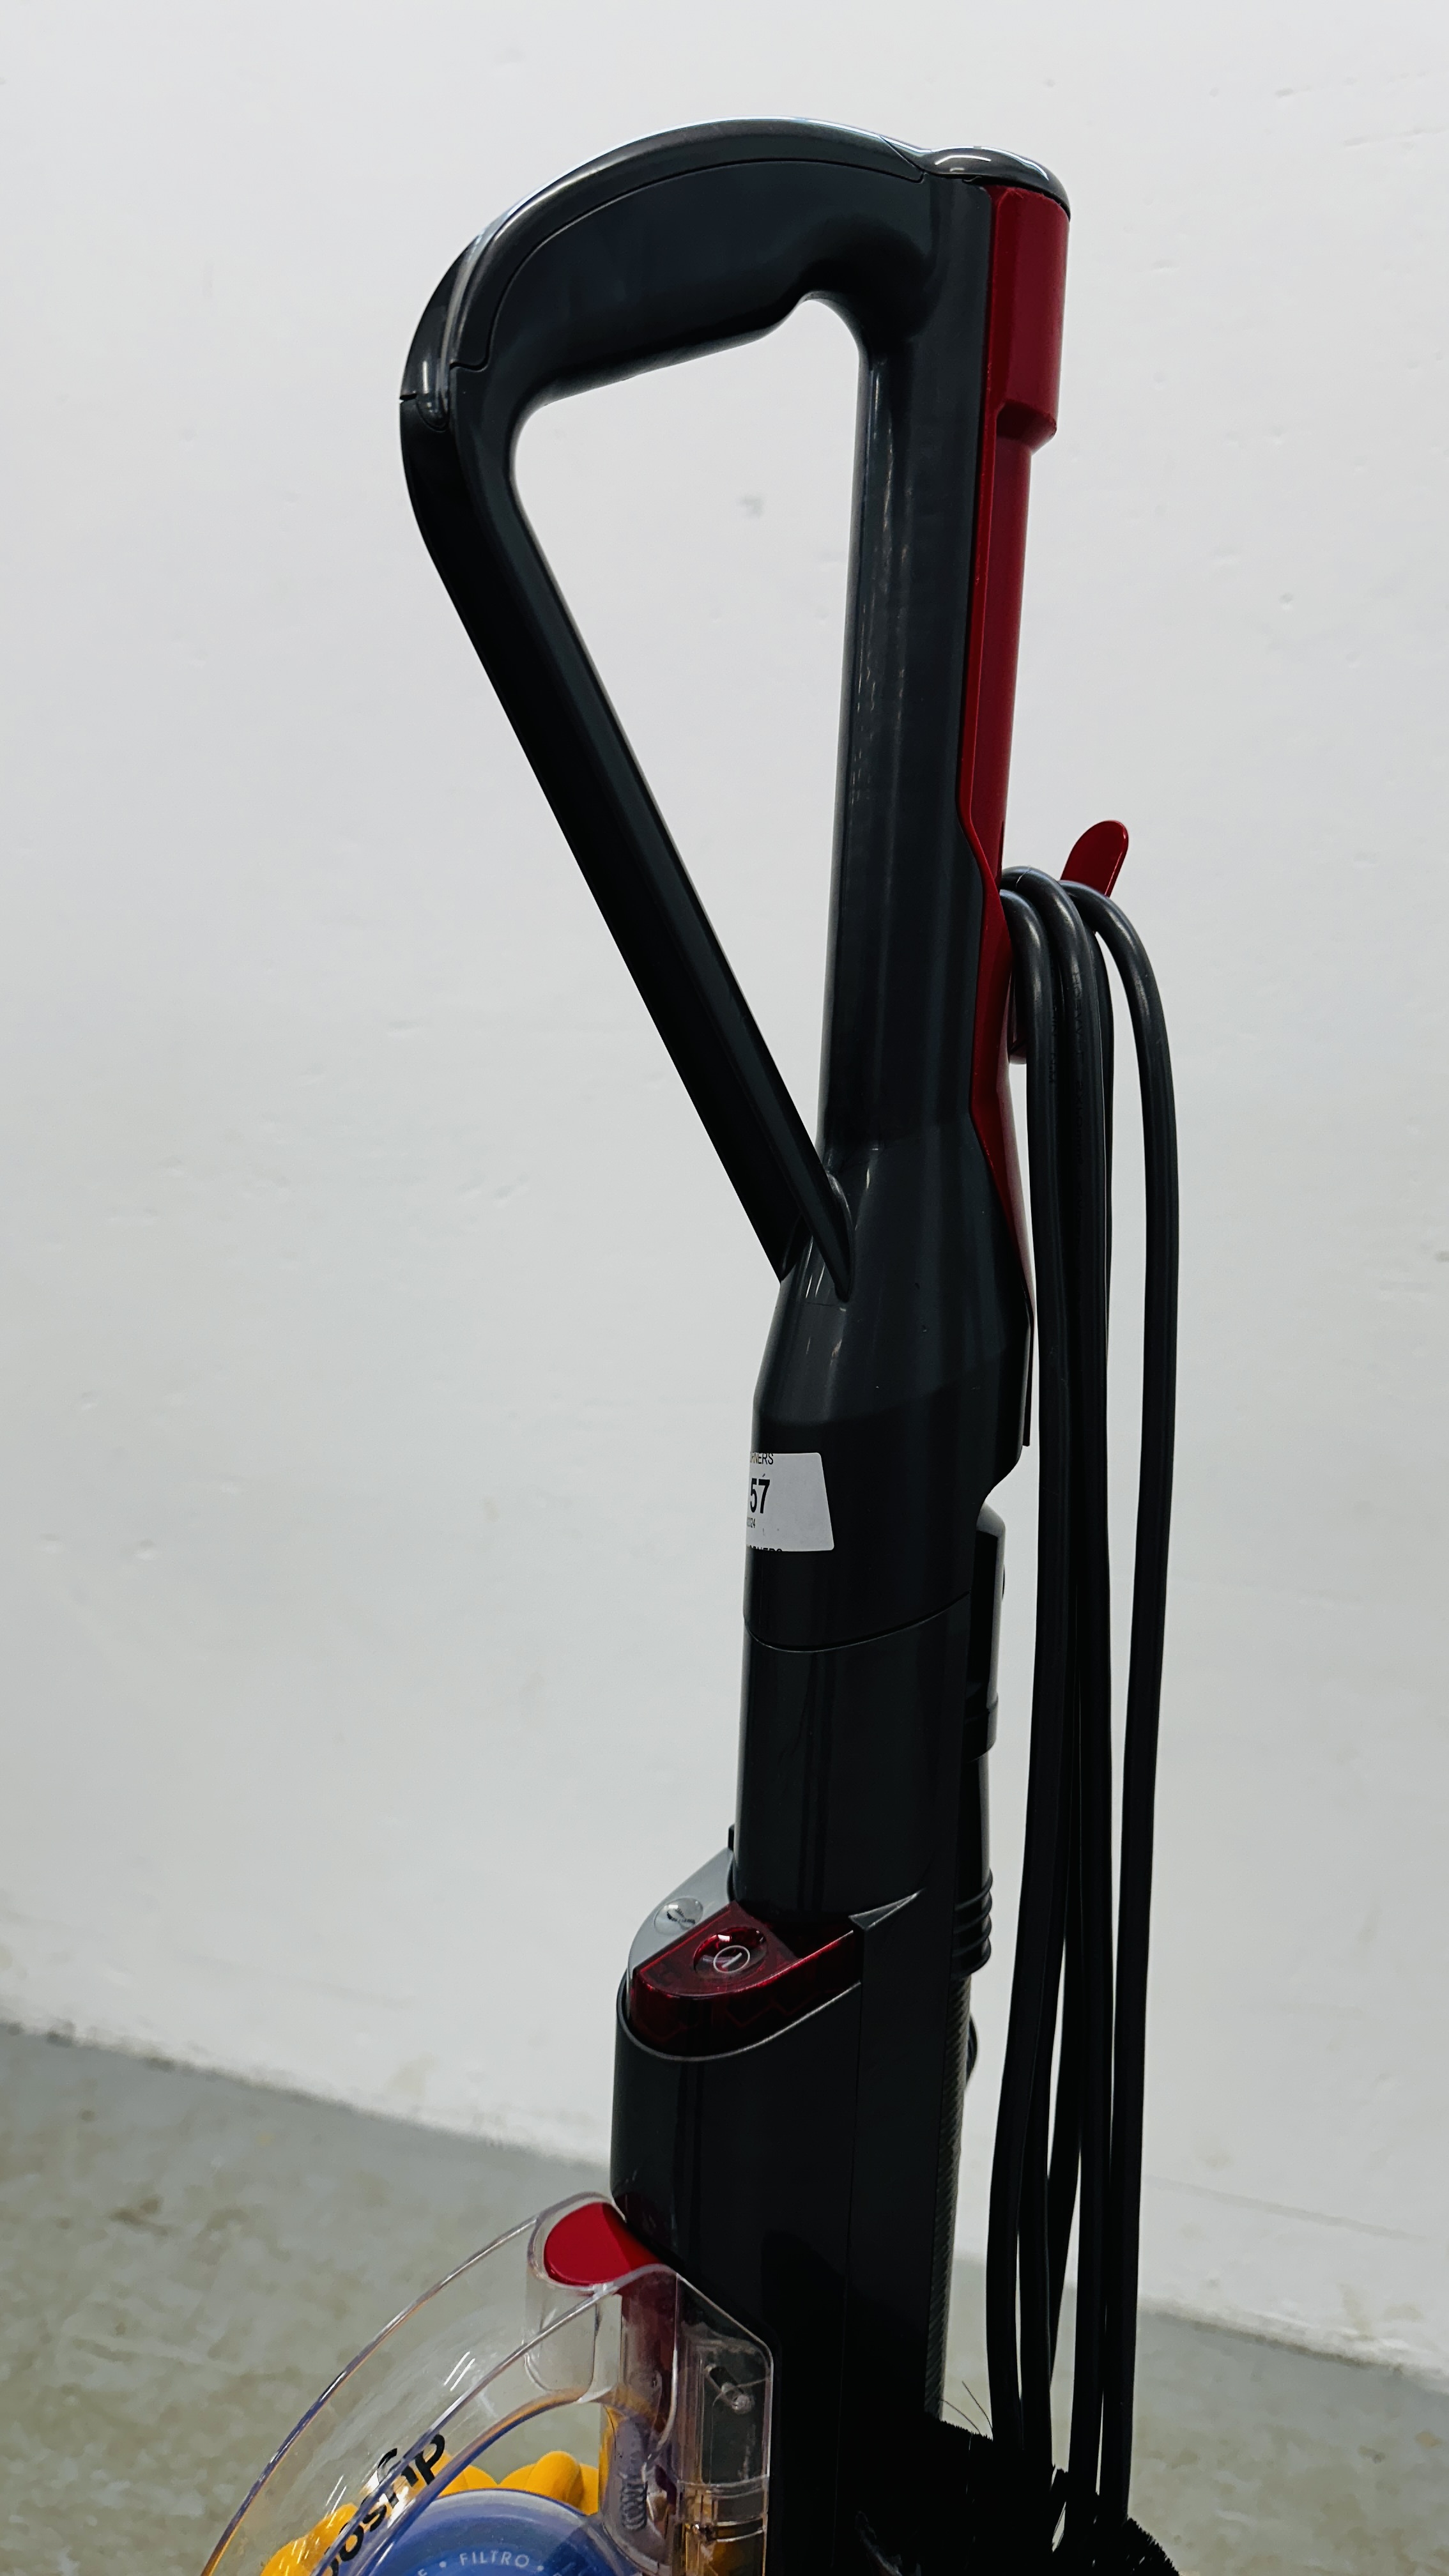 A DYSON DC 40 UPRIGHT VACUUM CLEANER - SOLD AS SEEN. - Bild 4 aus 5